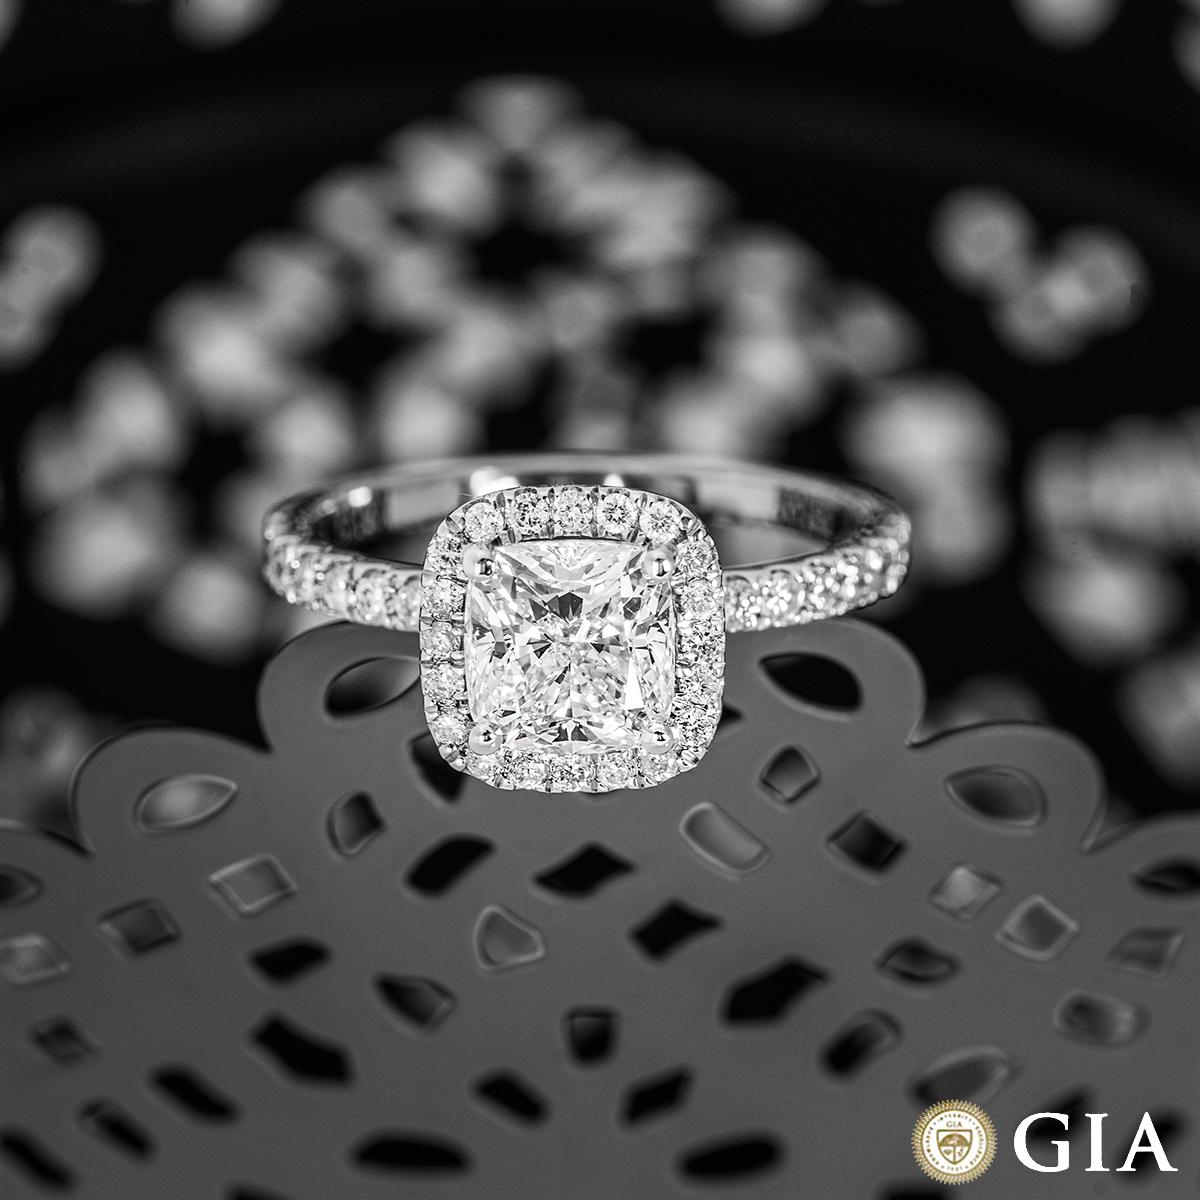 GIA Certified White Gold Cushion Cut Diamond Engagement Ring 1.51ct F/VS2 For Sale 3